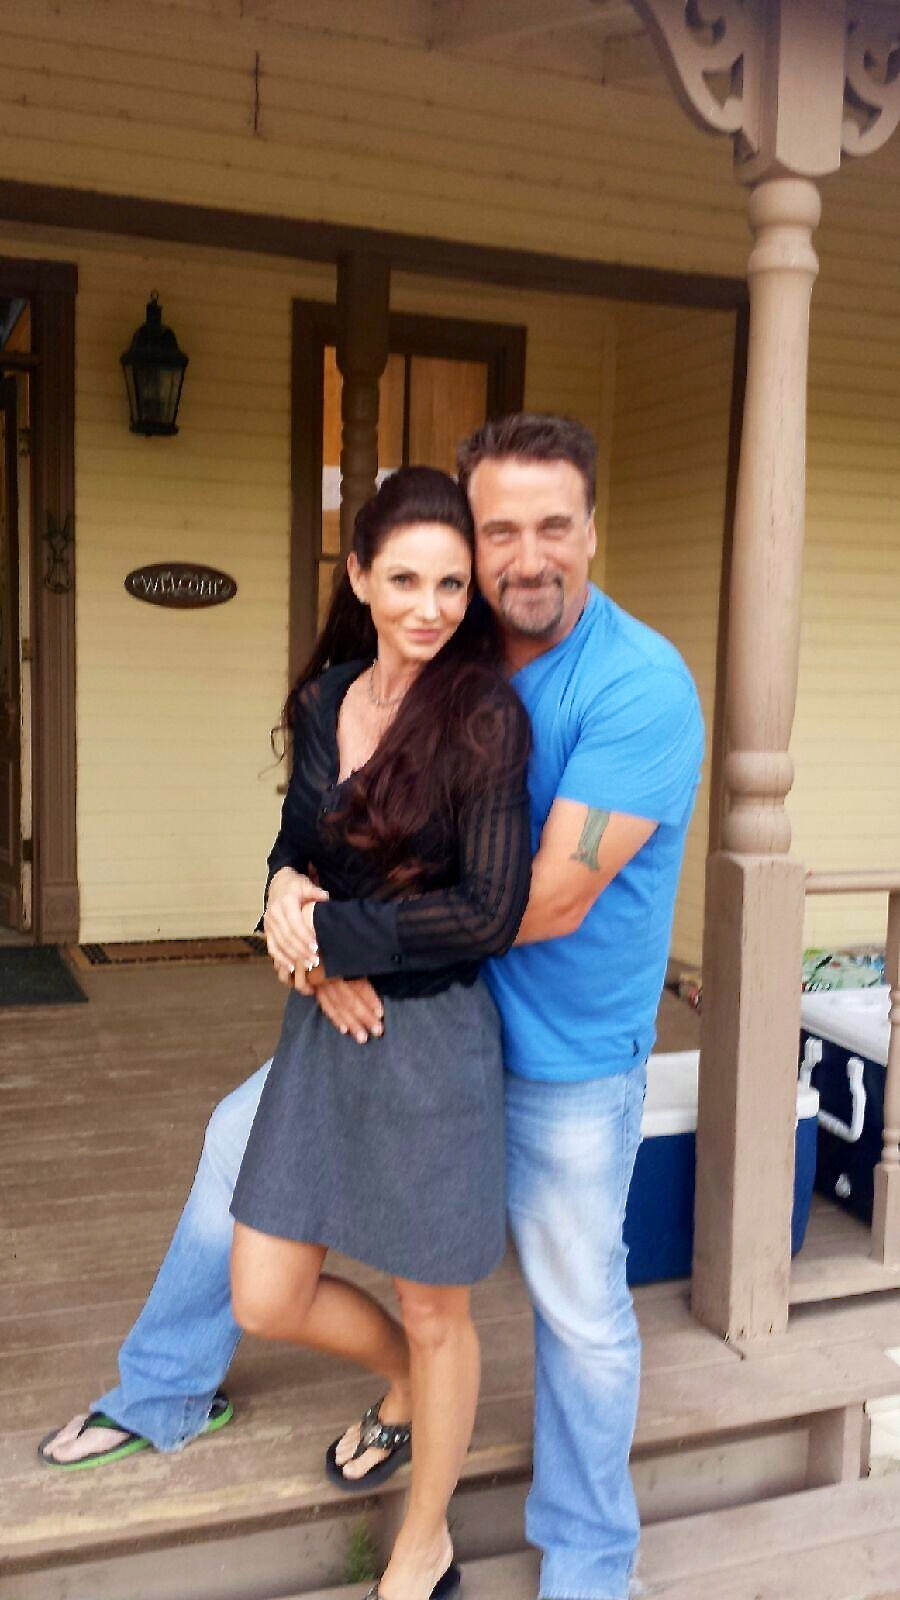 Having sooo much fun working side-by-side (literally) with Daniel Baldwin of the set of Deadly Sanctuary!